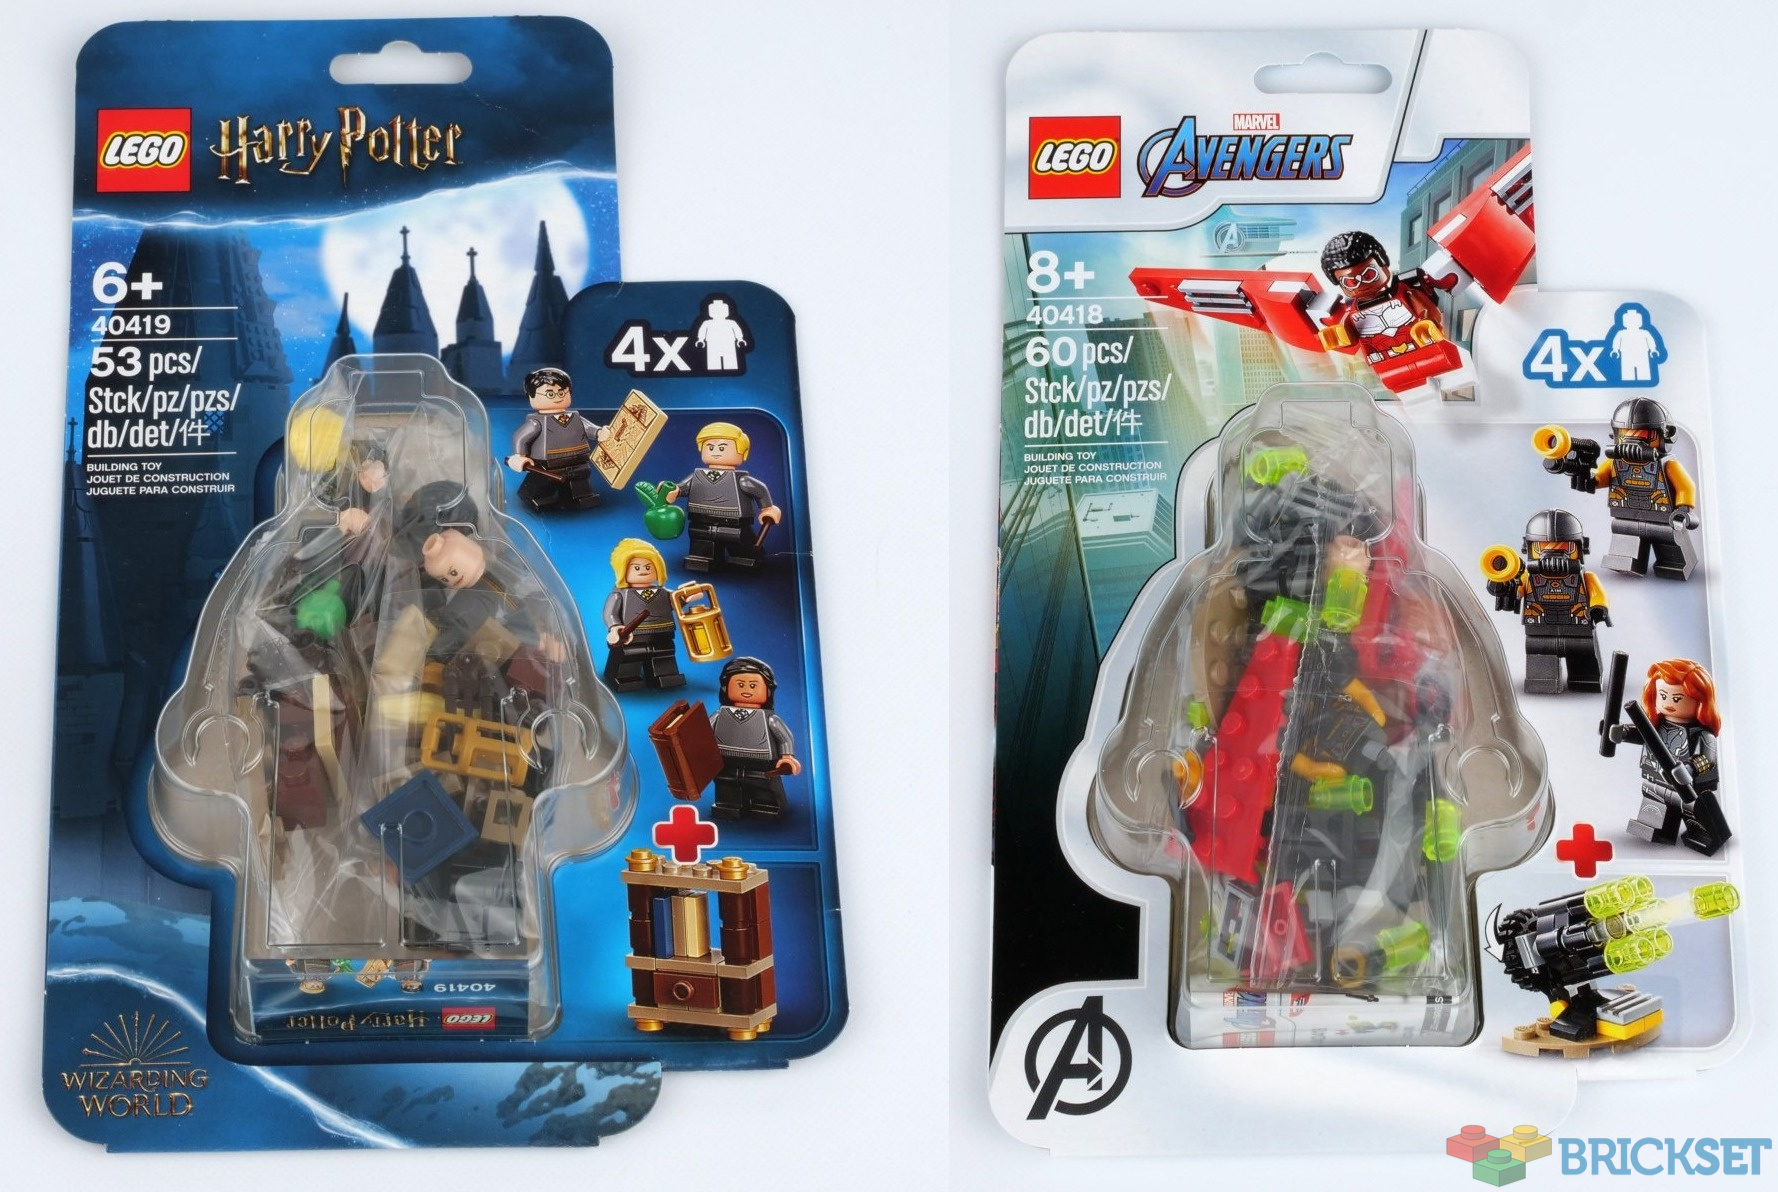 Two New Avengers Harry Potter Accessory Sets Coming Soon - The Brick Fan